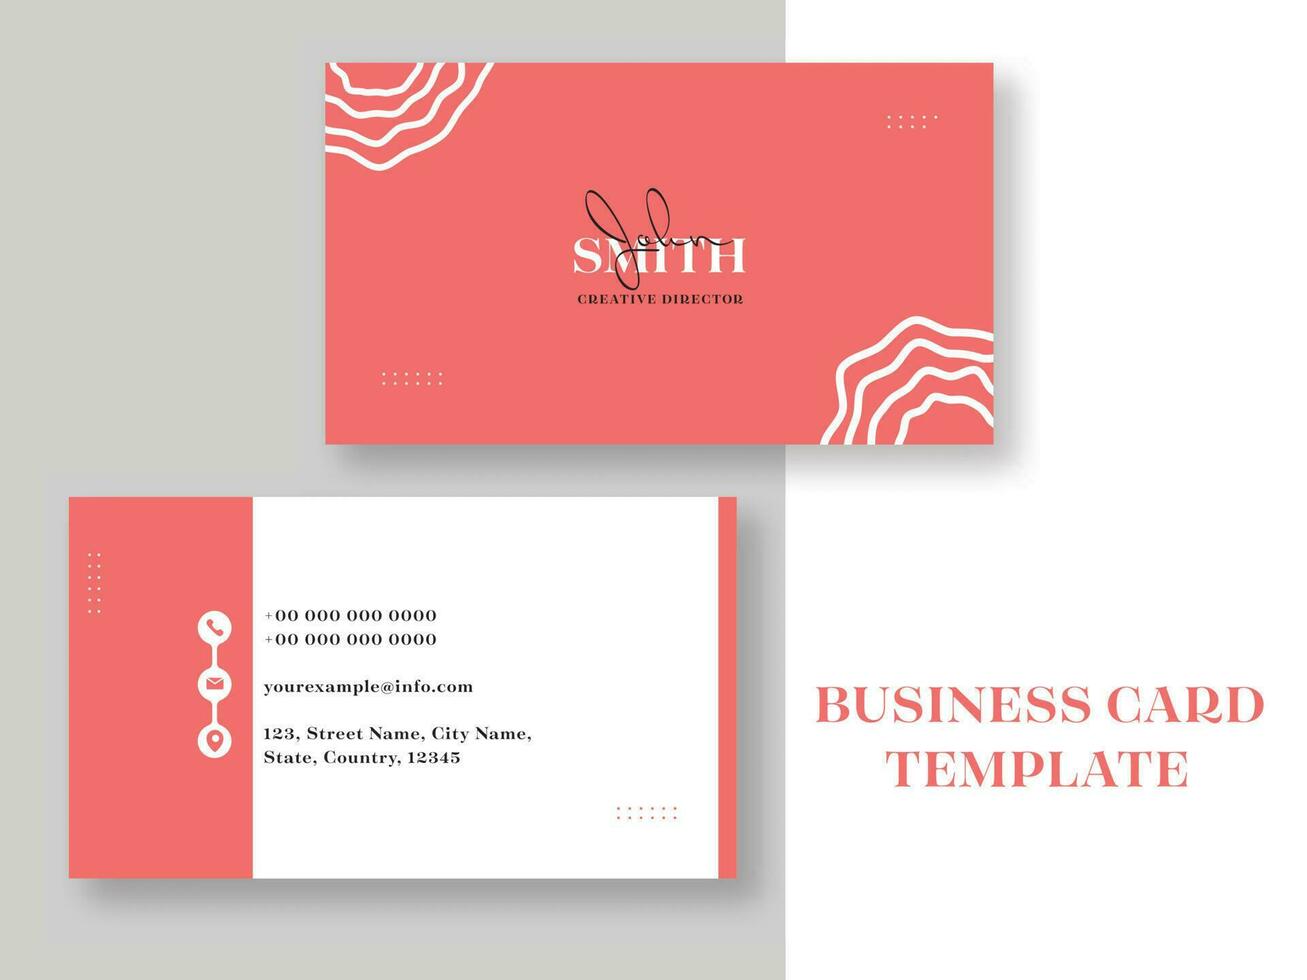 Horizontal Business Card Template Layout In Red And White Color. vector